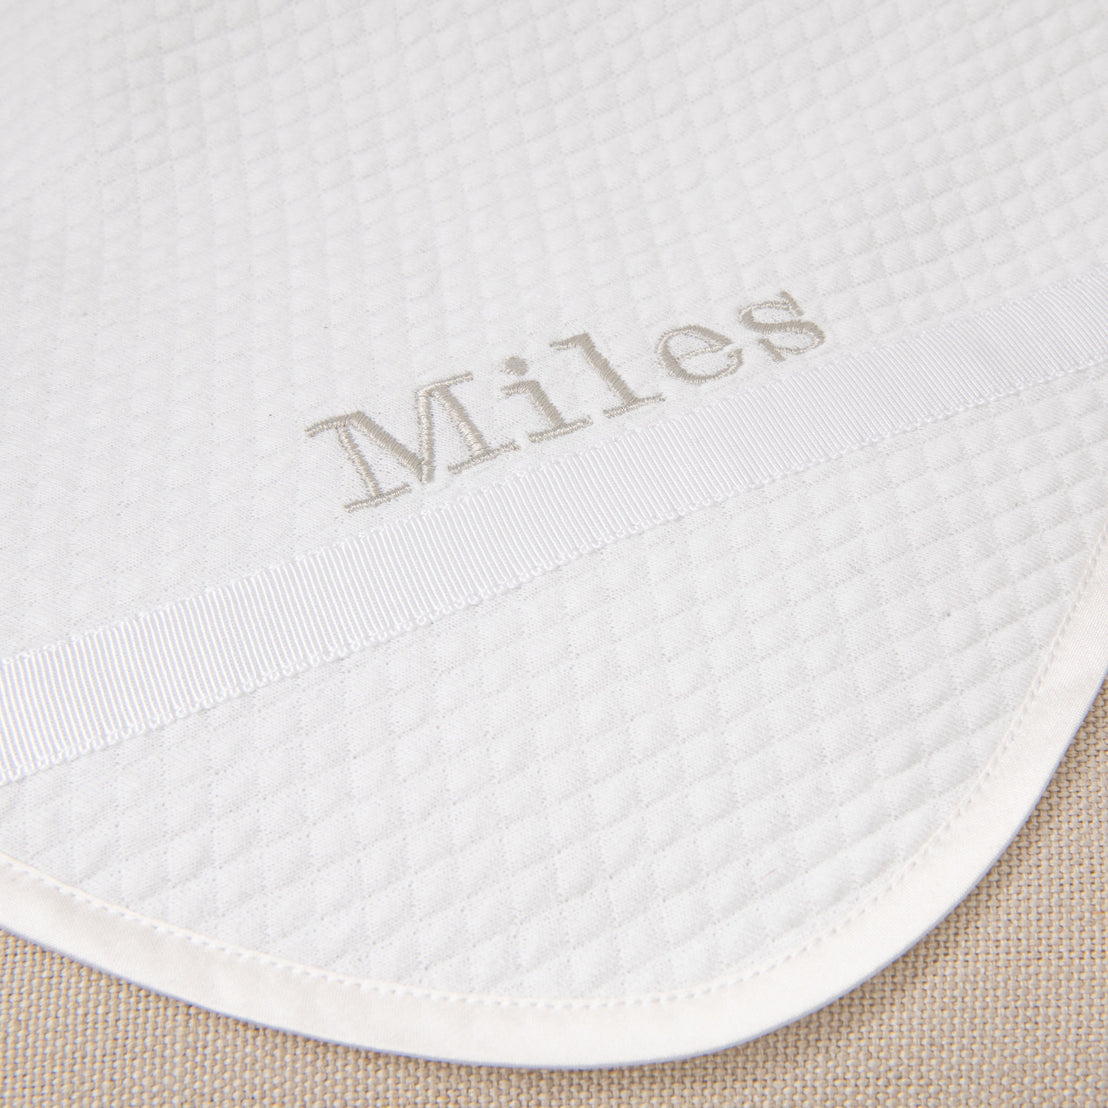 Flat lay photo of the Miles Personalized Blanket on a chair. It is made with quilted cotton and a ribbon detail on the corner. The name "Miles" is embroidered on the corner.